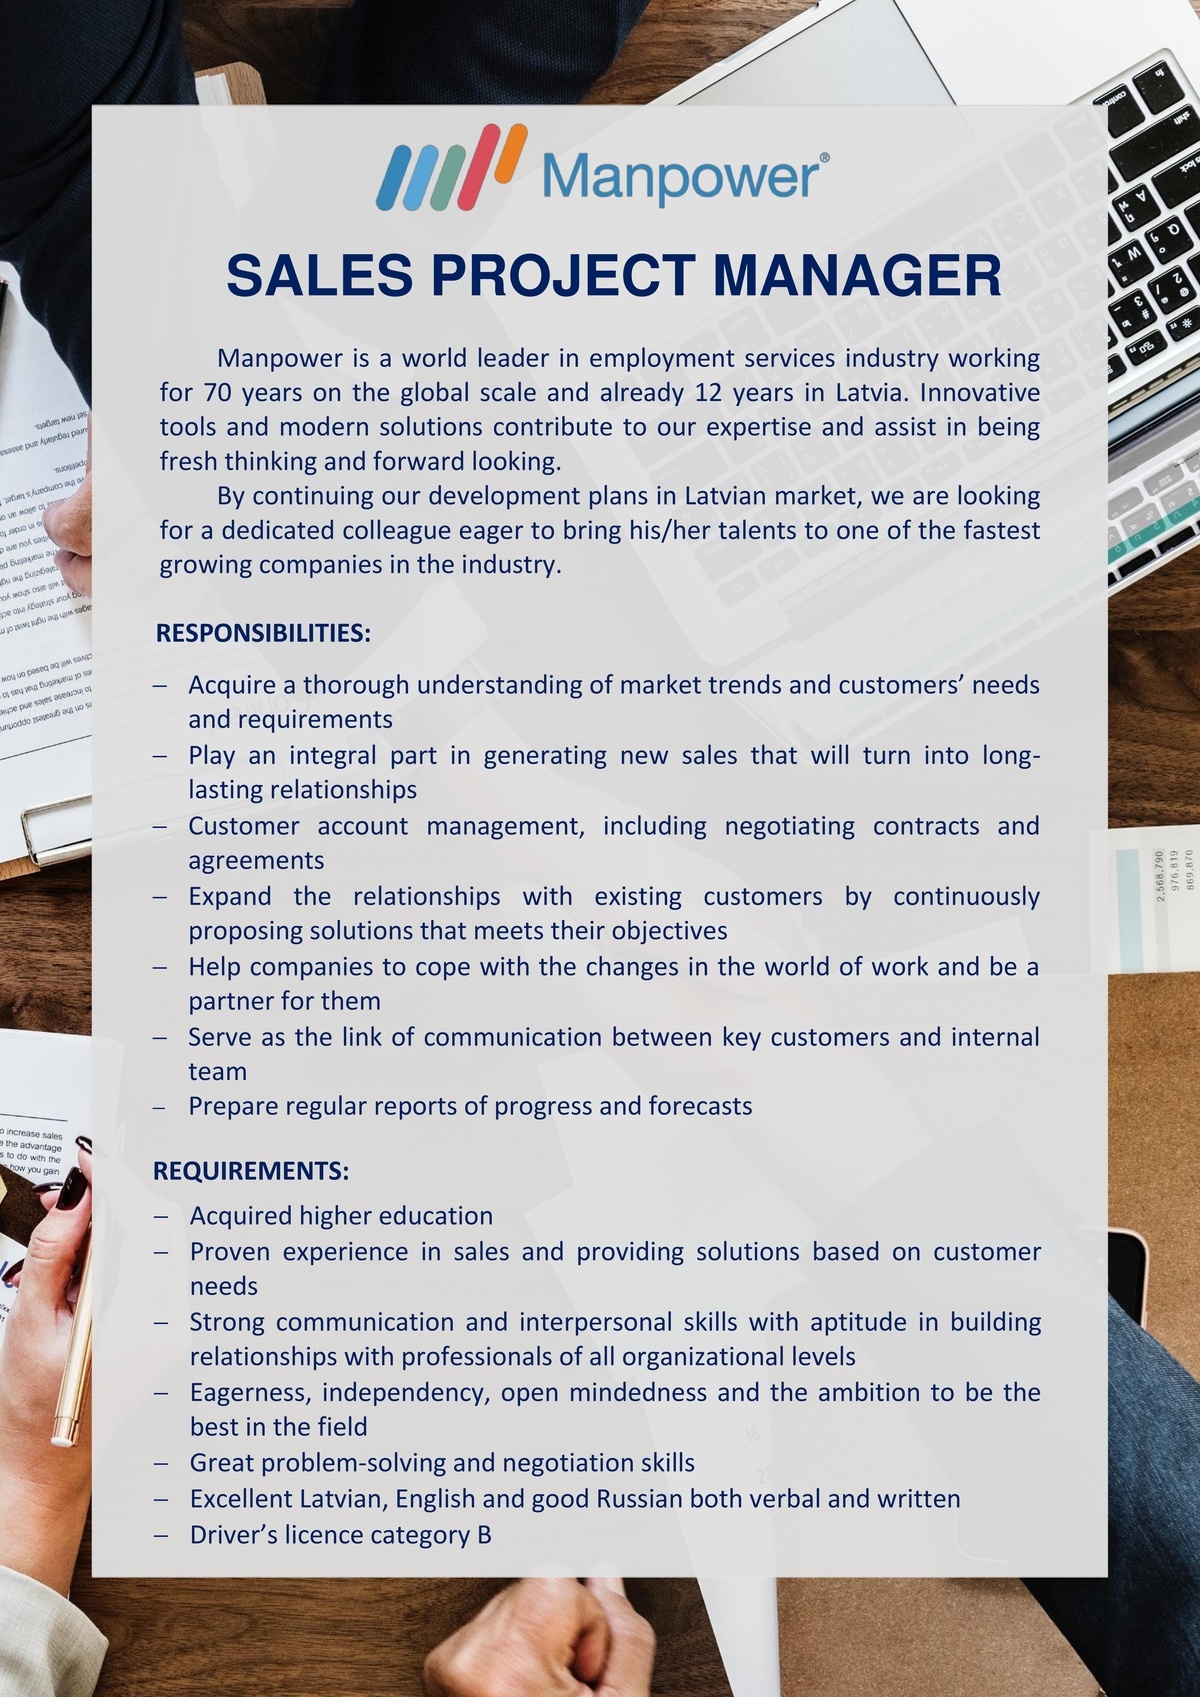 Manpower Sales Project Manager